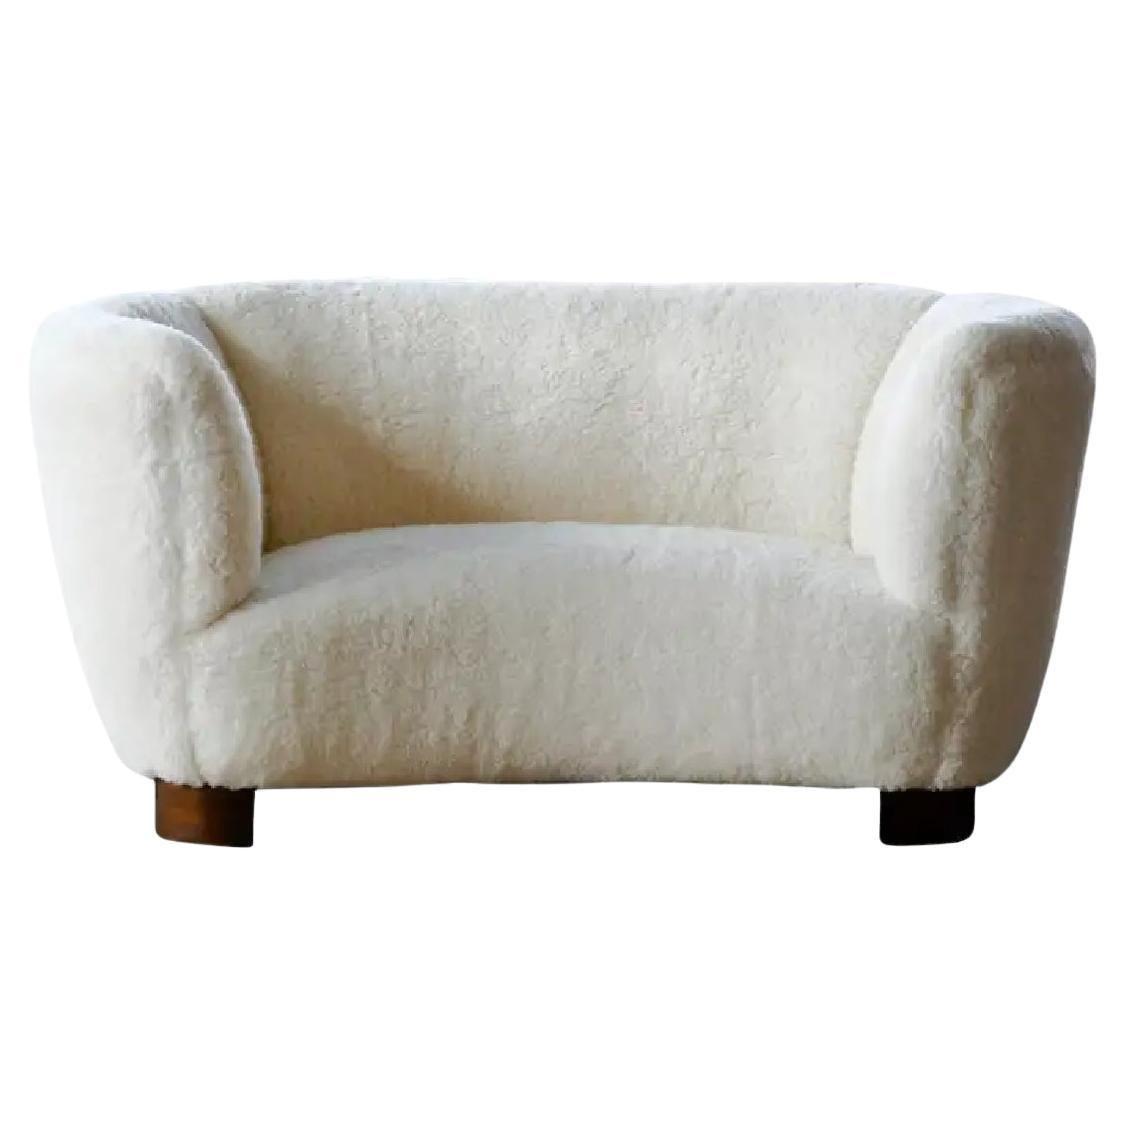 Danish 1940's Banana Shaped Curved Loveseat or Sofa Covered in Lambswool For Sale